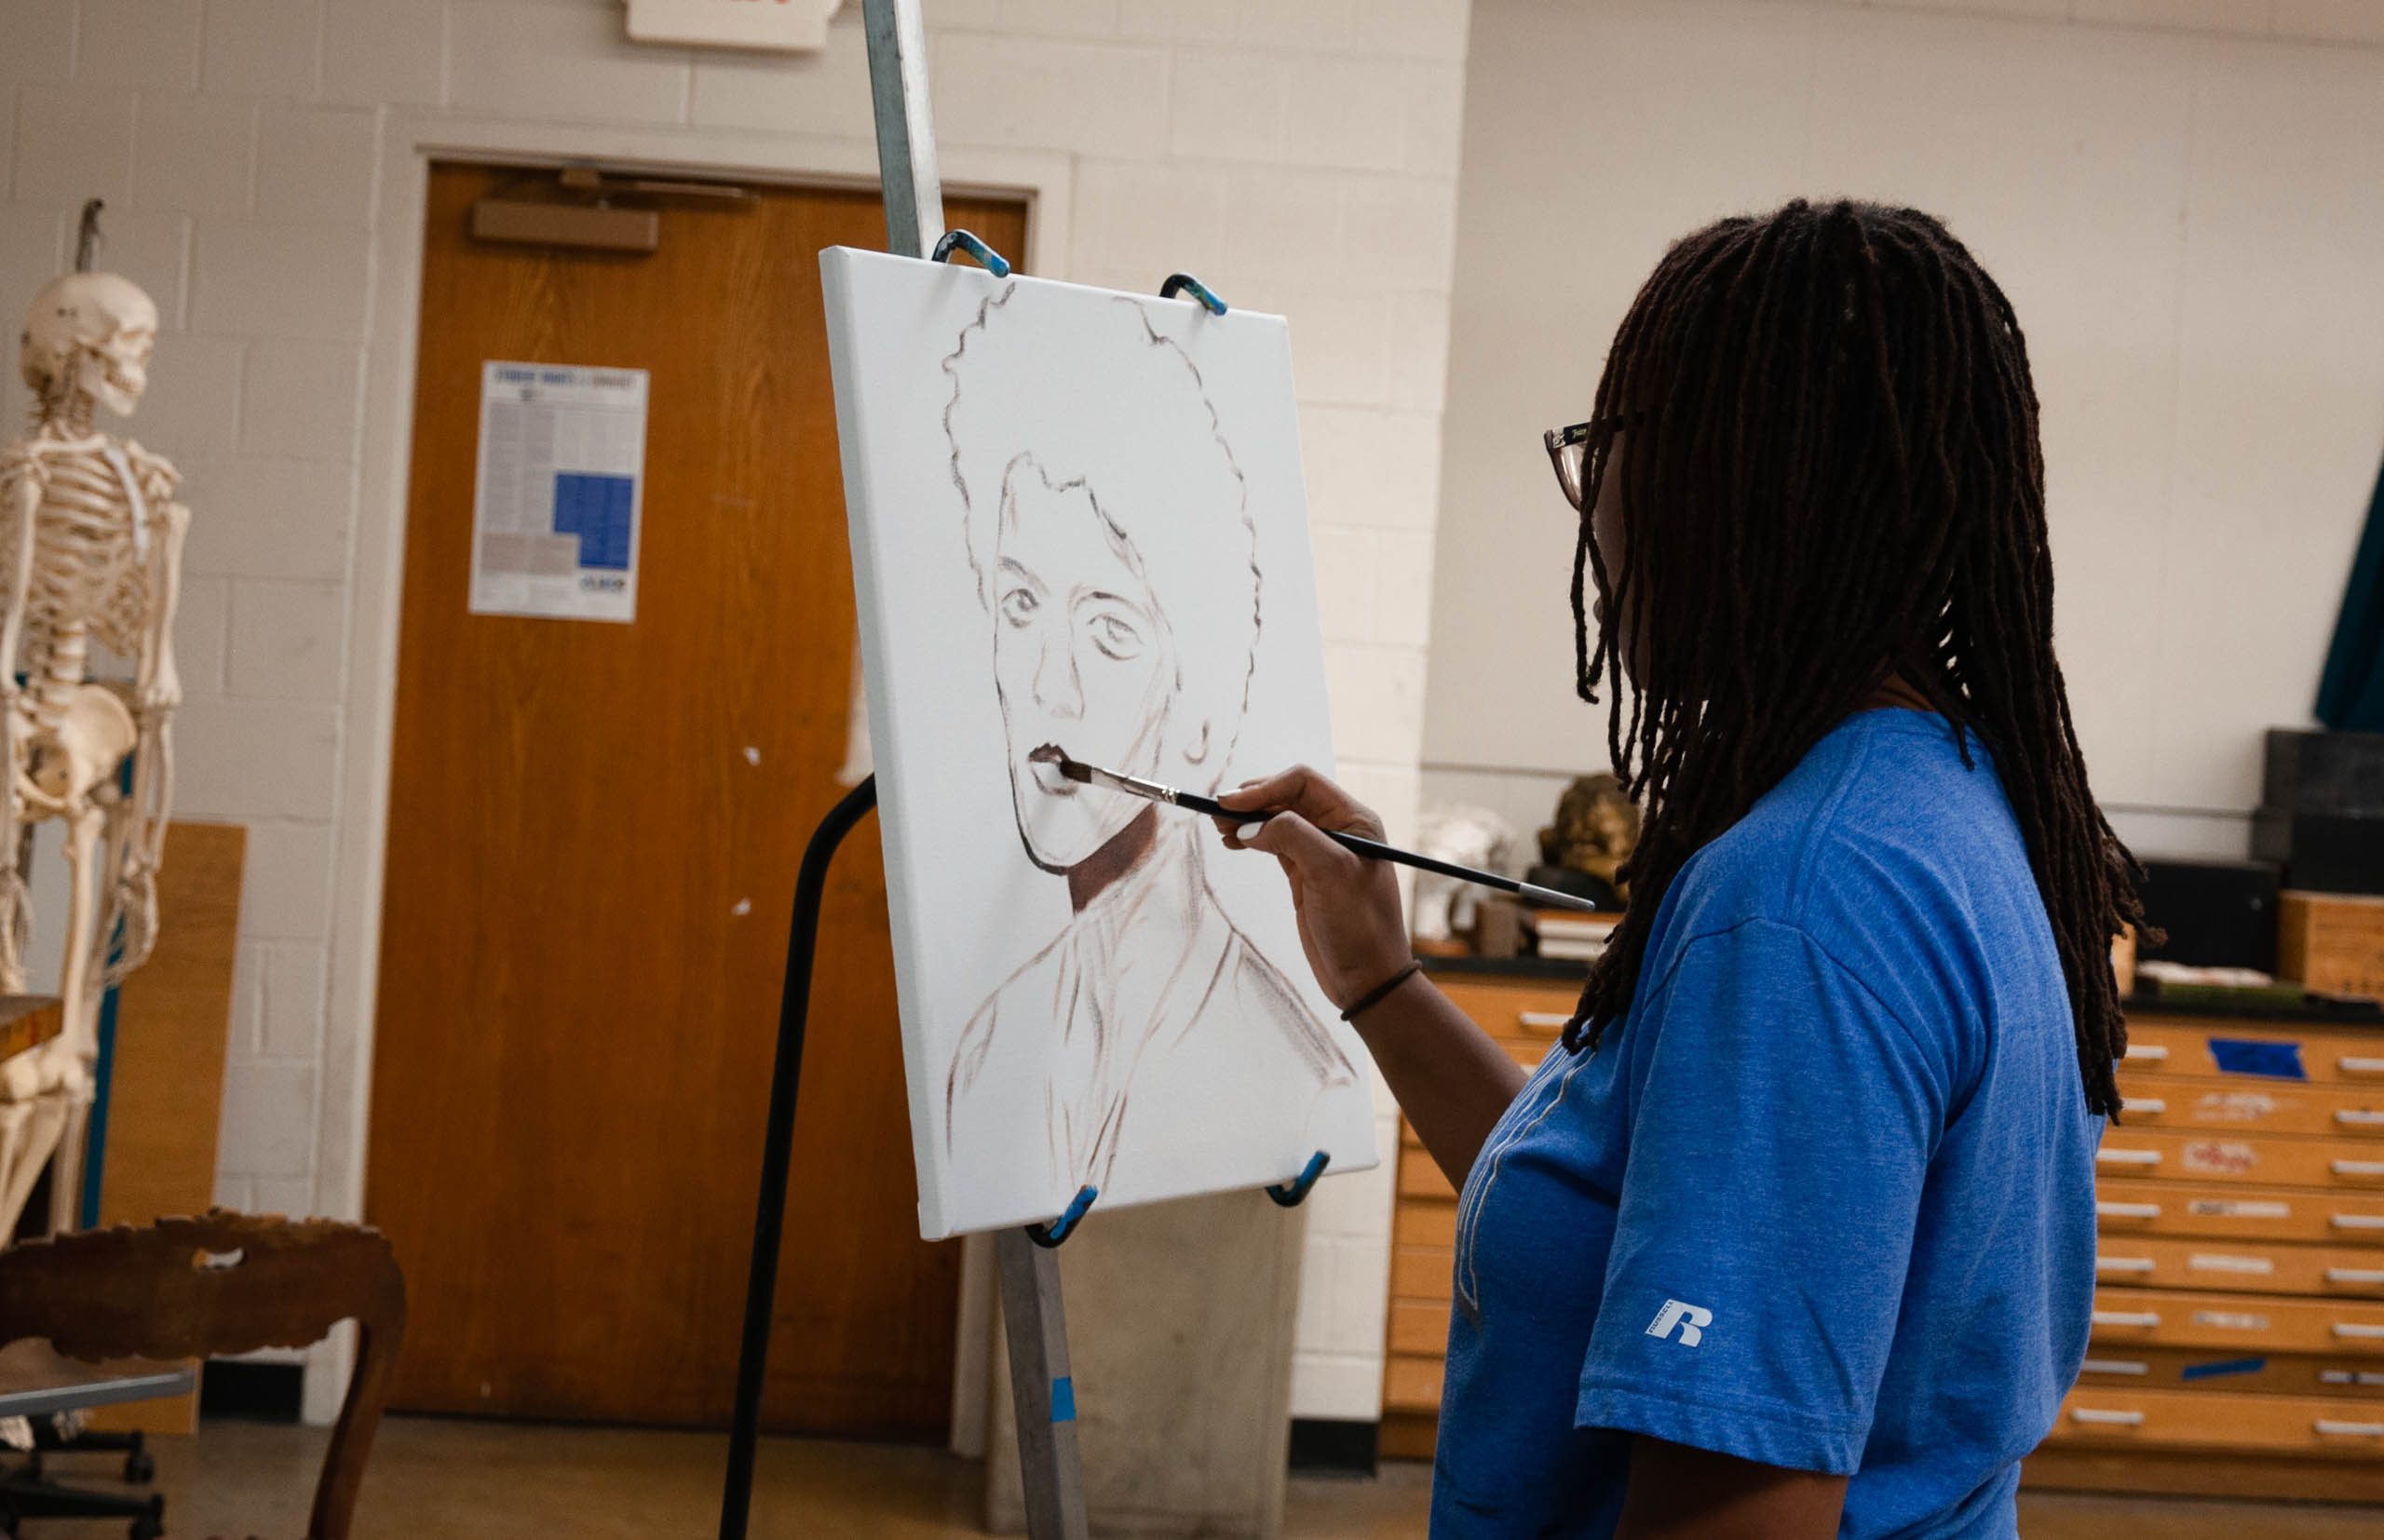 Student in painting class painting a picture of a man on canvas